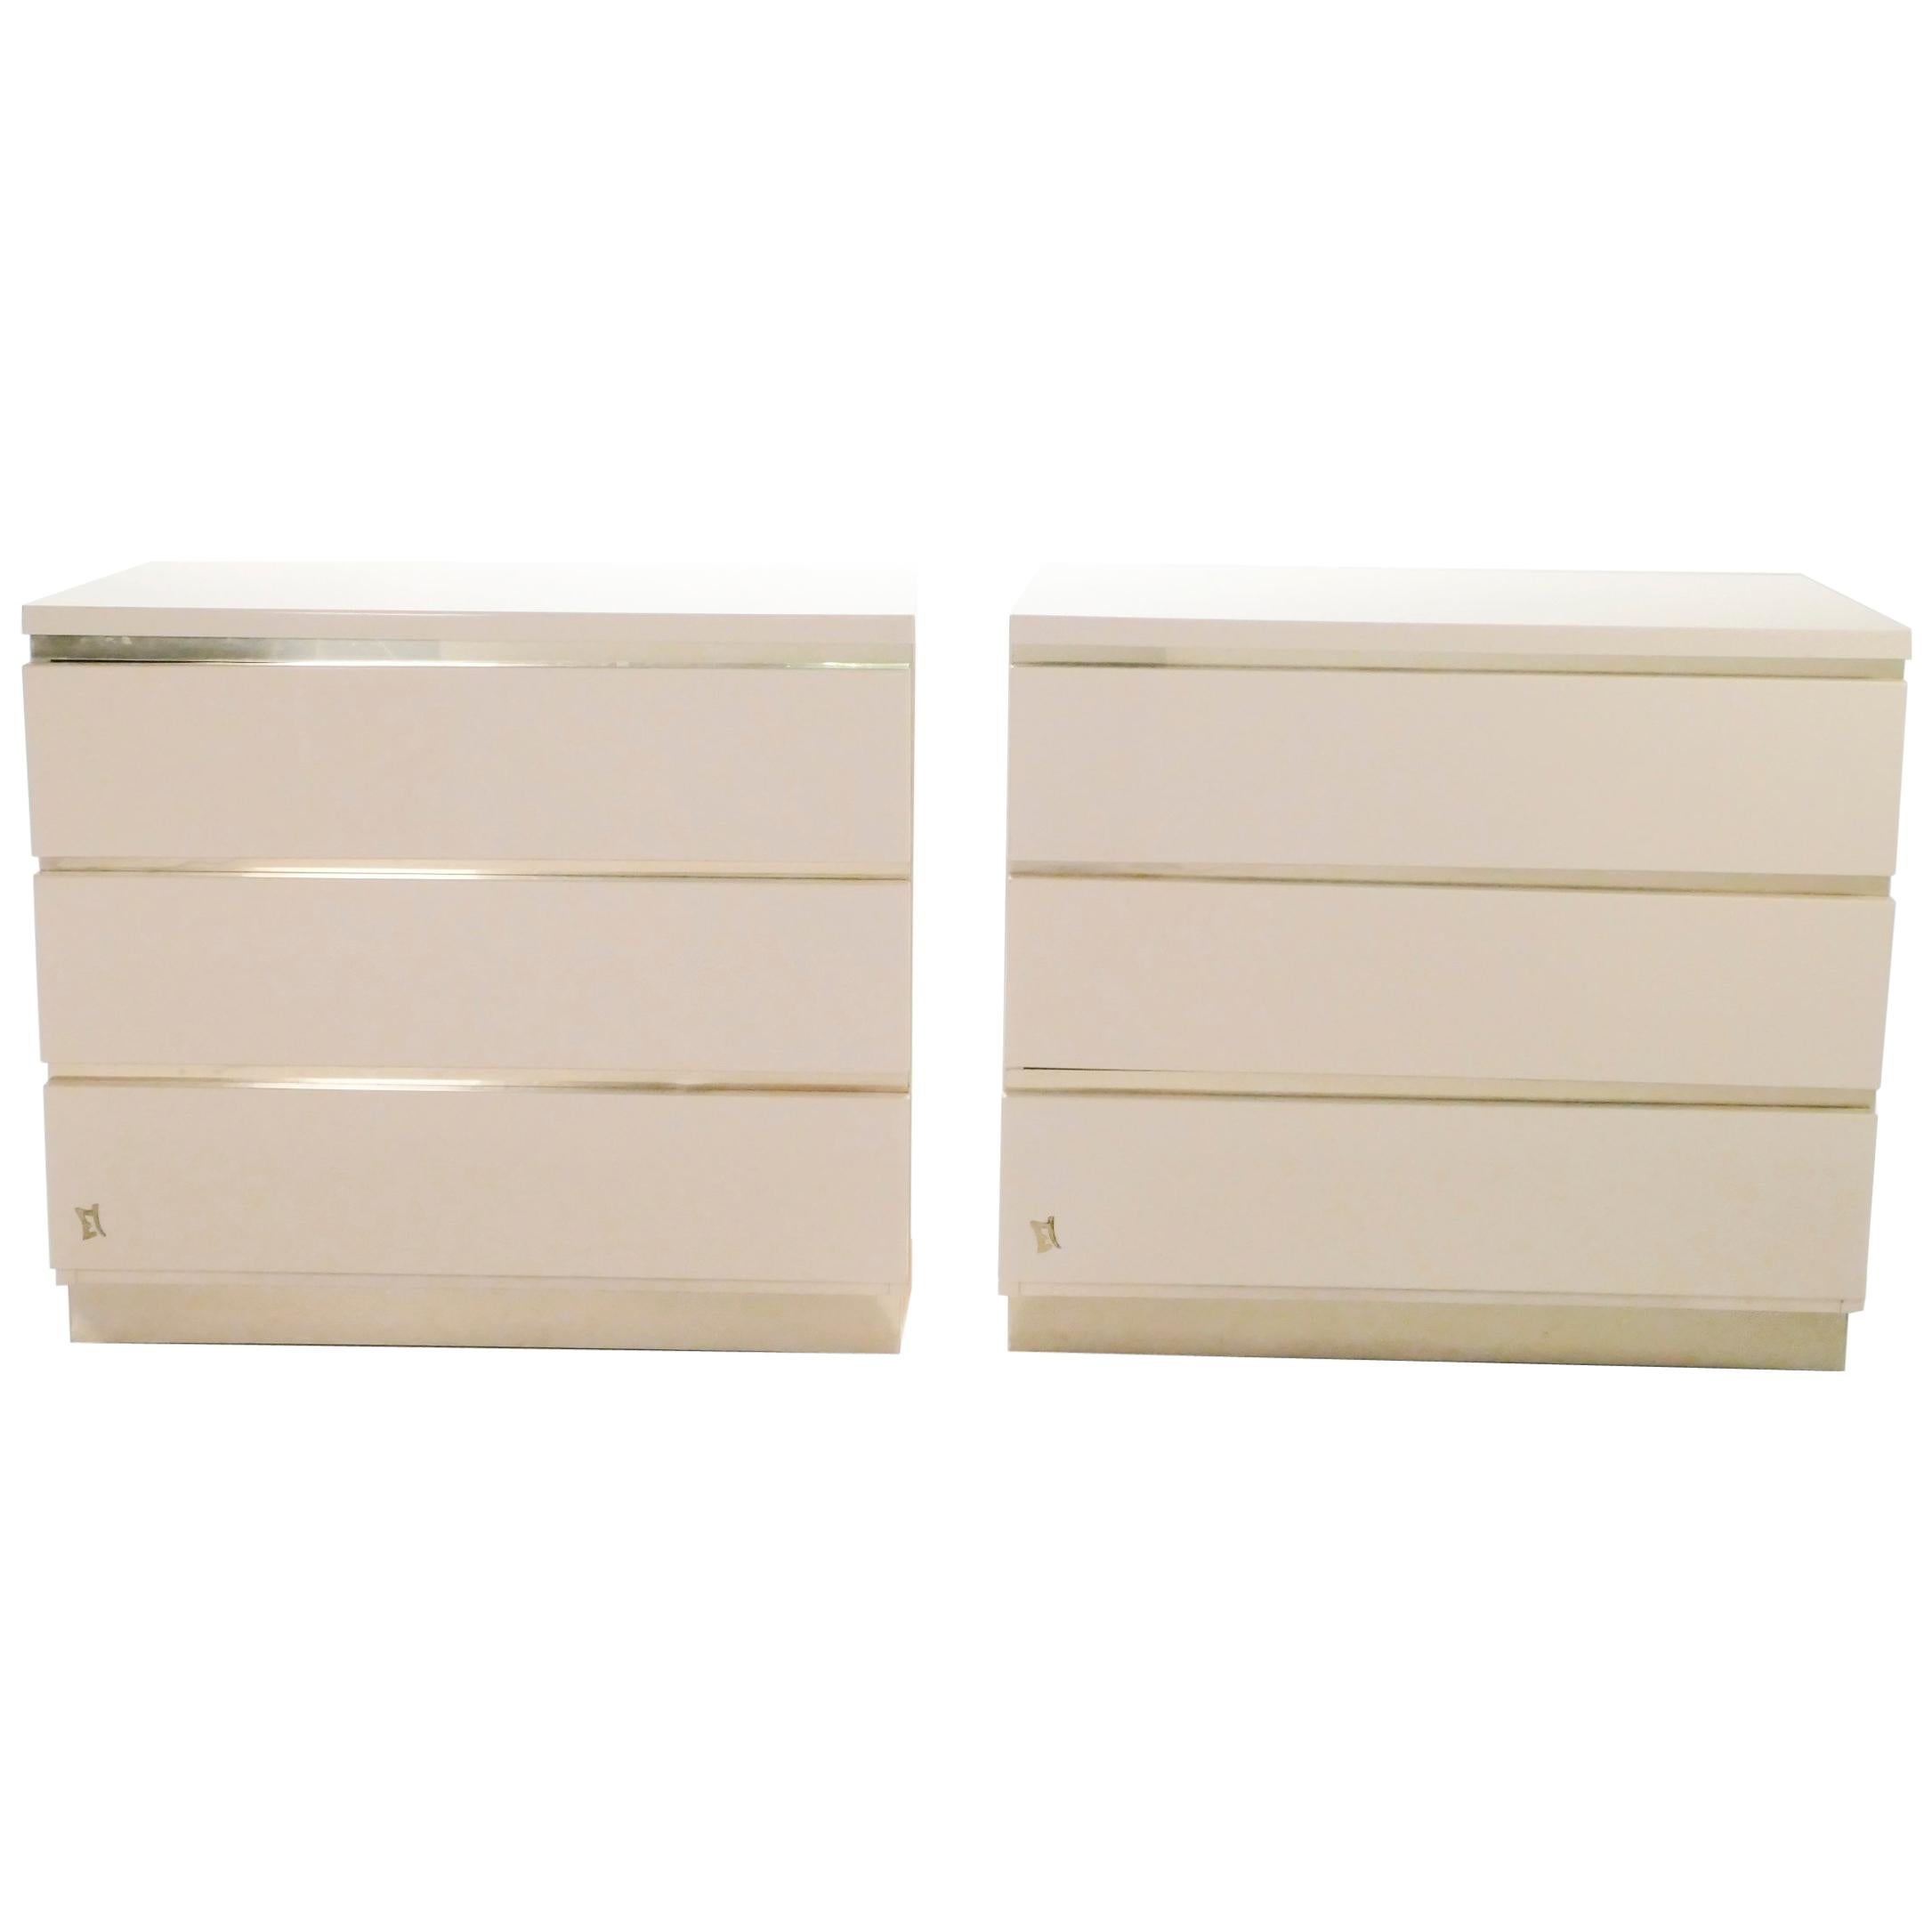 Crisp white lacquer, paired with bright brass accents, feels creamy and luxe on this pair of chests of drawers. Their boxy, simple style is typical of both the 1970s and designer Jean Claude Mahey for Maison Romeo. Whether used as two small,